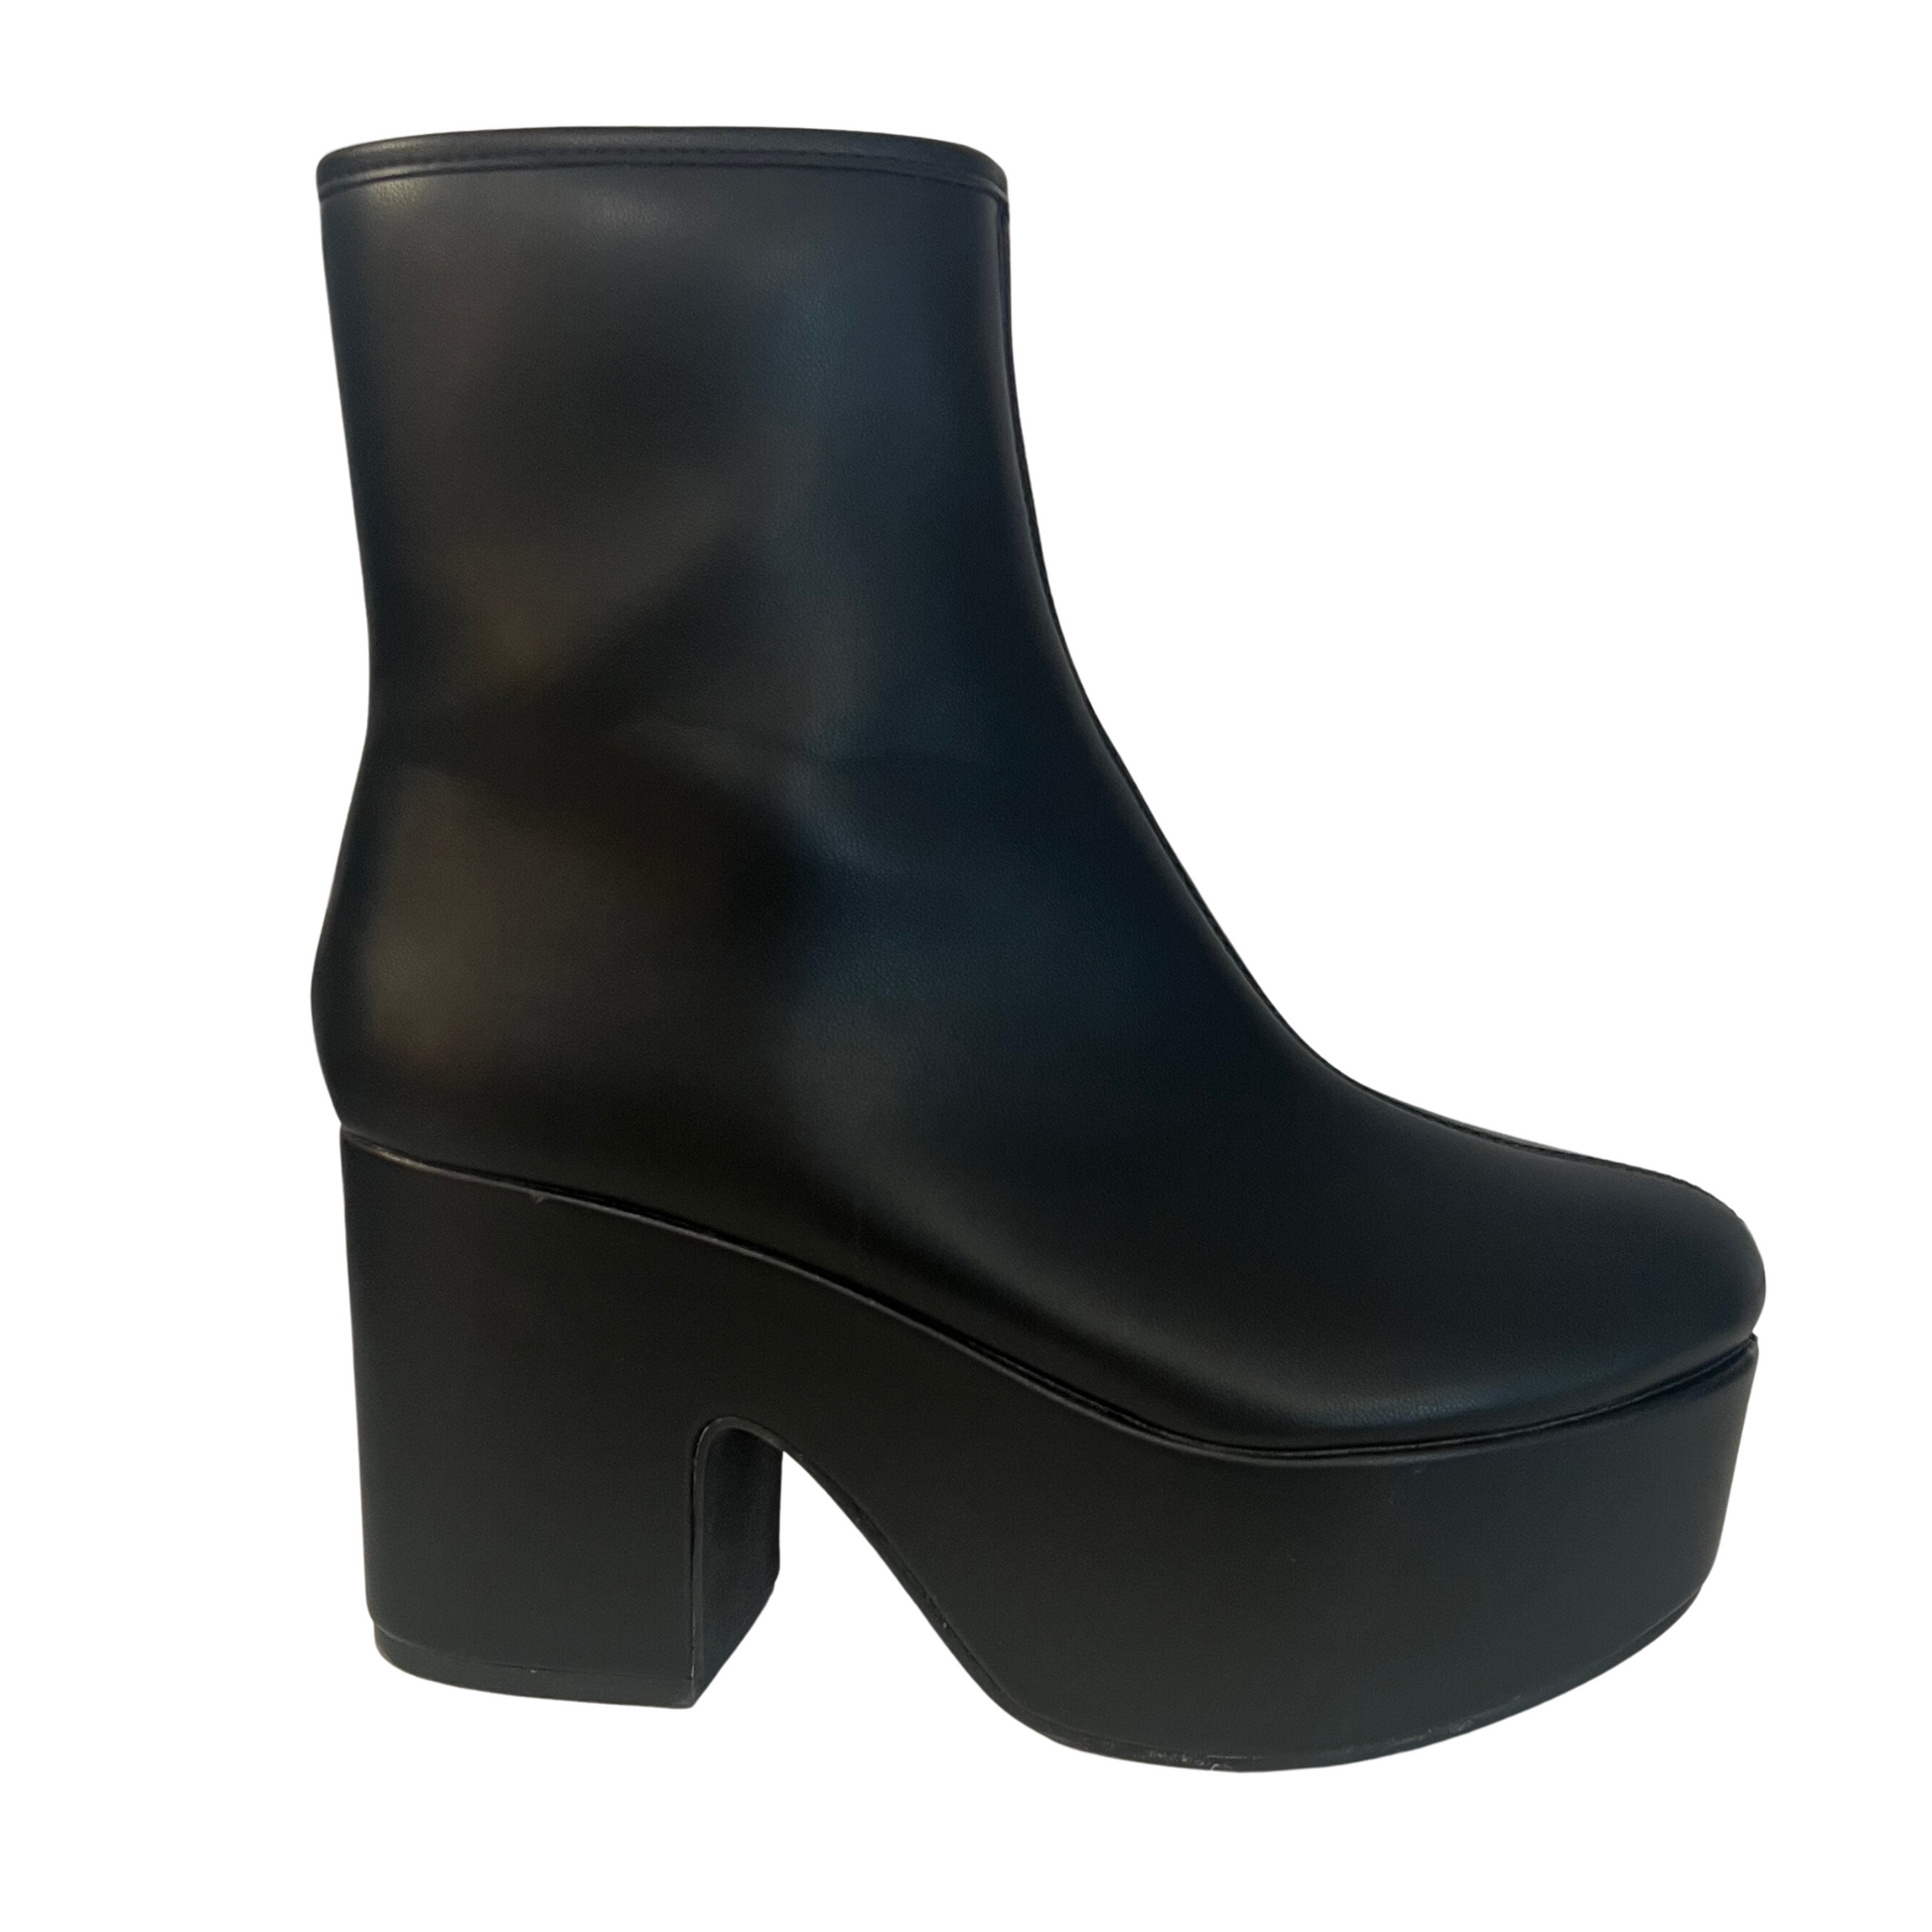 The Xiva by Shushop features a black platform bootie that stands out in any outfit. Its durable construction ensures long-lasting comfort, and the zip up design ensures a secure fit for all-day use. Whether you're looking for a stylish statement or a comfortable everyday shoe, the Xiva checks all the boxes.